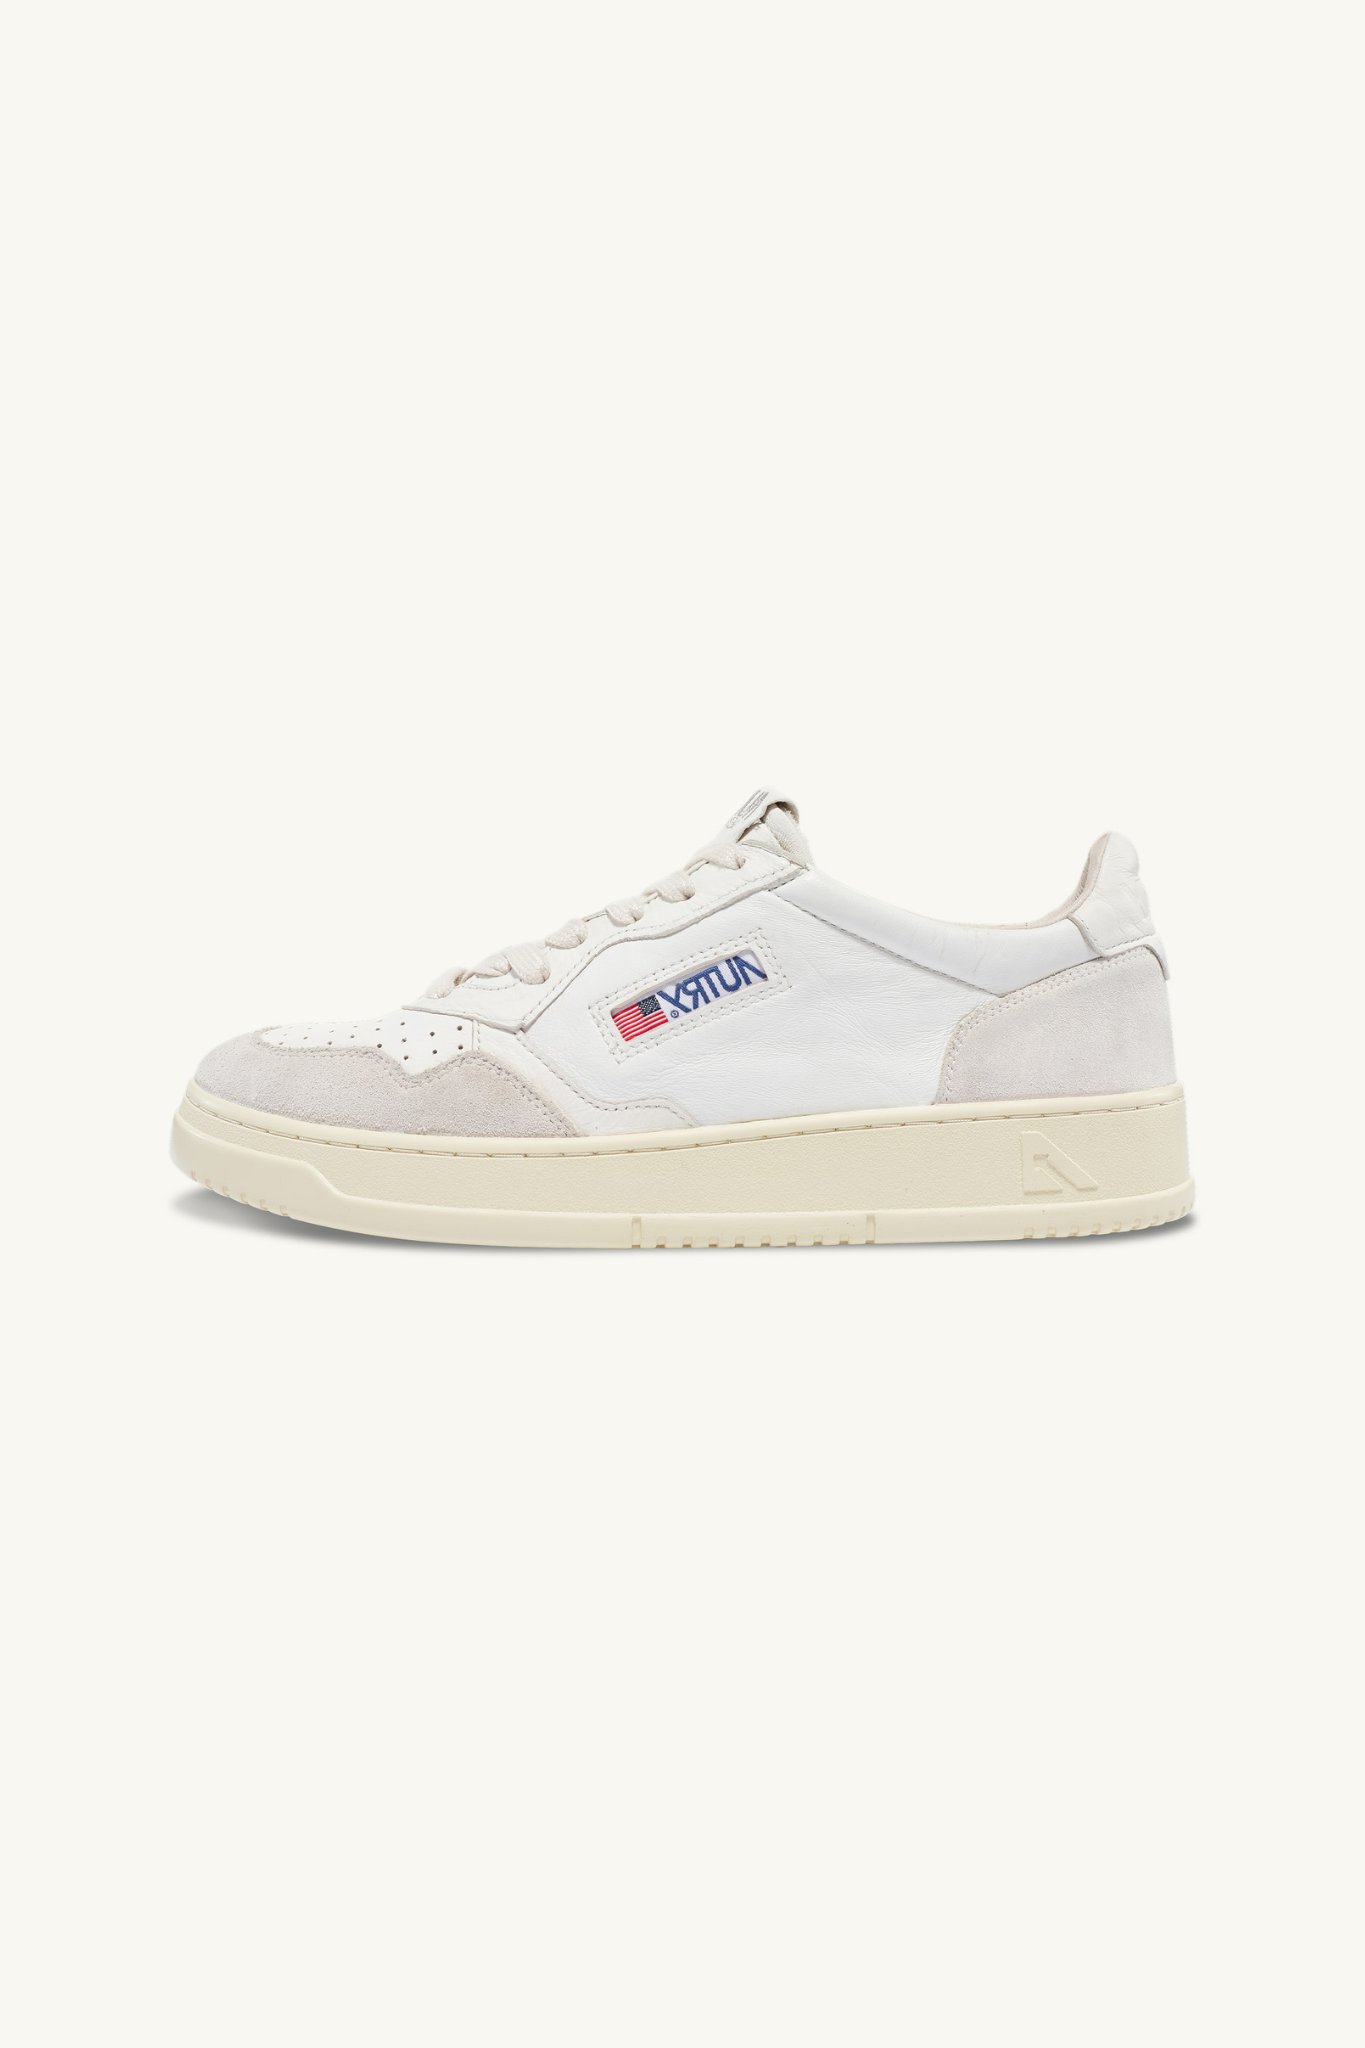 AULM-GS30 - MEDALIST LOW SNEAKERS IN WHITE GOATSKIN AND SUEDE